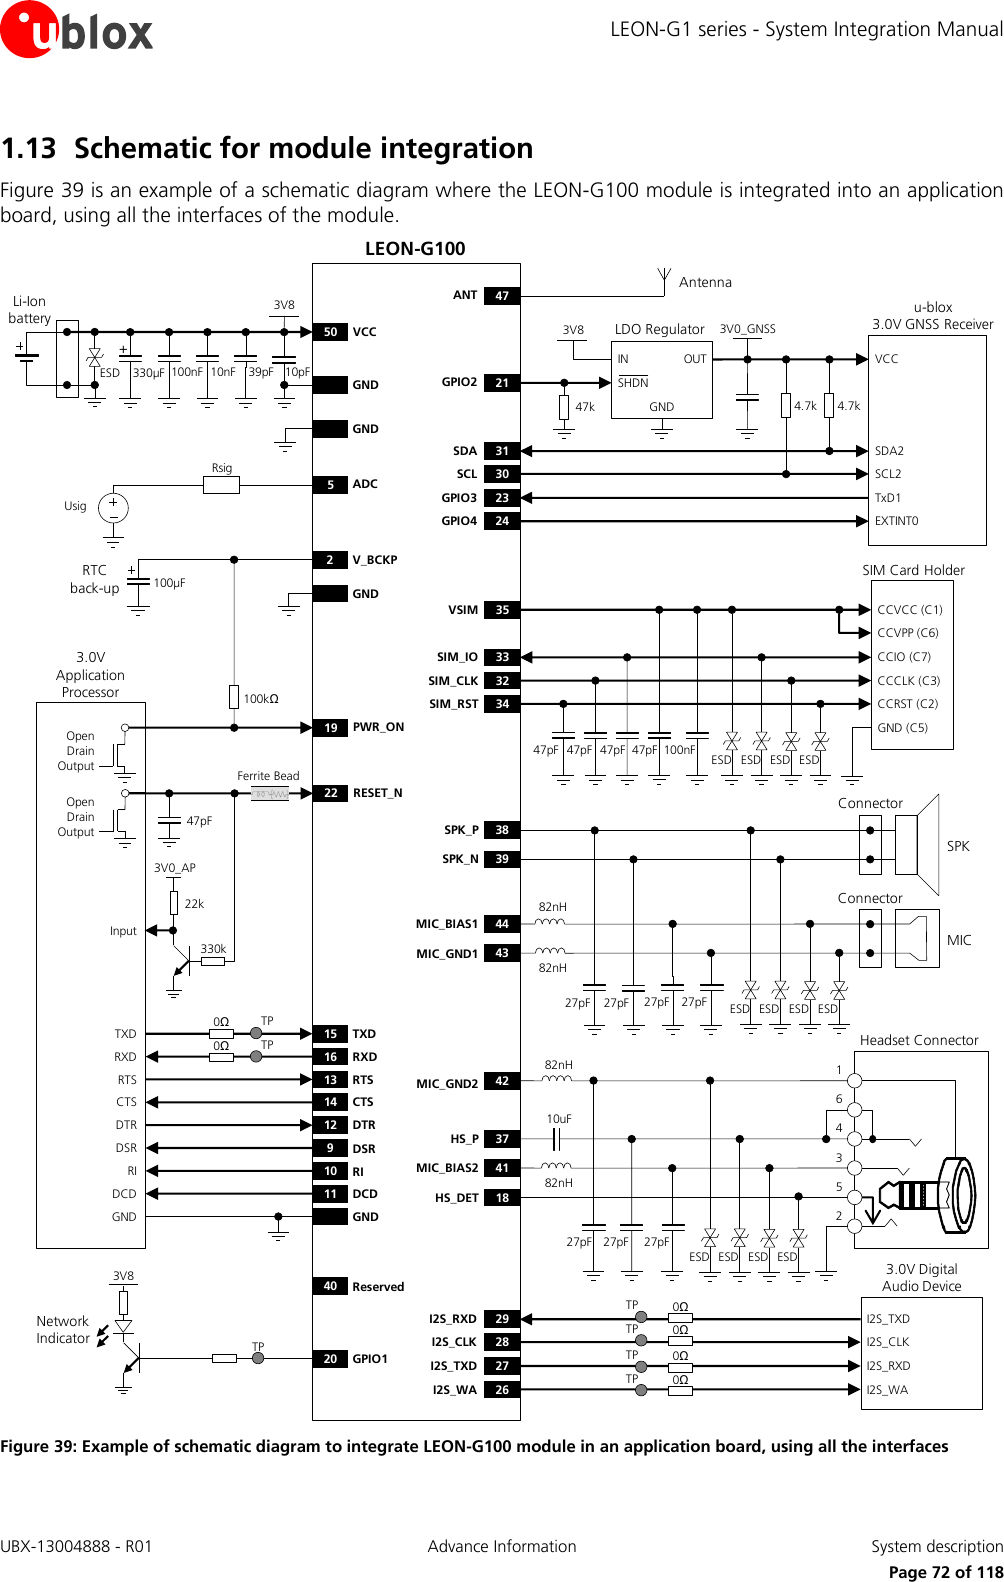 LEON-G1 series - System Integration Manual UBX-13004888 - R01  Advance Information  System description      Page 72 of 118 1.13 Schematic for module integration Figure 39 is an example of a schematic diagram where the LEON-G100 module is integrated into an application board, using all the interfaces of the module. 47pFSIM Card HolderCCVCC (C1)CCVPP (C6)CCIO (C7)CCCLK (C3)CCRST (C2)GND (C5)47pF 47pF 100nF35VSIM33SIM_IO32SIM_CLK34SIM_RST47pF ESDESD ESD ESDTXDRXDRTSCTSDTRDSRRIDCDGND15 TXD12 DTR16 RXD13 RTS14 CTS9DSR10 RI11 DCDGND330µF 39pF GND10nF100nF 10pFLEON-G10050 VCC+100µF2V_BCKPGNDRTC back-upu-blox3.0V GNSS Receiver4.7kOUTINGNDLDO RegulatorSHDNSDASCL4.7k3V8 3V0_GNSSSDA2SCL2GPIO3GPIO4TxD1EXTINT03130232447kVCCGPIO2 21ANT 47 Antenna3.0V Digital Audio DeviceI2S_RXDI2S_CLKI2S_TXDI2S_CLKI2S_TXDI2S_WAI2S_RXDI2S_WA2928272620 GPIO13V8Network Indicator22 RESET_NFerrite Bead47pF3.0V Application ProcessorOpen Drain Output19 PWR_ON100kΩOpen Drain Output0Ω0ΩTPTP10uFHeadset Connector27pF27pF 27pF25346182nH82nH18HS_DET37HS_P42MIC_GND241MIC_BIAS2SPK27pF 27pF82nH82nHMIC27pF 27pF39SPK_N38SPK_P43MIC_GND144MIC_BIAS1ConnectorConnectorESD ESD ESD ESDESD ESD ESD ESD0Ω0ΩTPTP0Ω0ΩTPTPTP22k330k3V0_APInput40 ReservedESDLi-Ion battery3V8GND5ADCUsigRsig Figure 39: Example of schematic diagram to integrate LEON-G100 module in an application board, using all the interfaces  